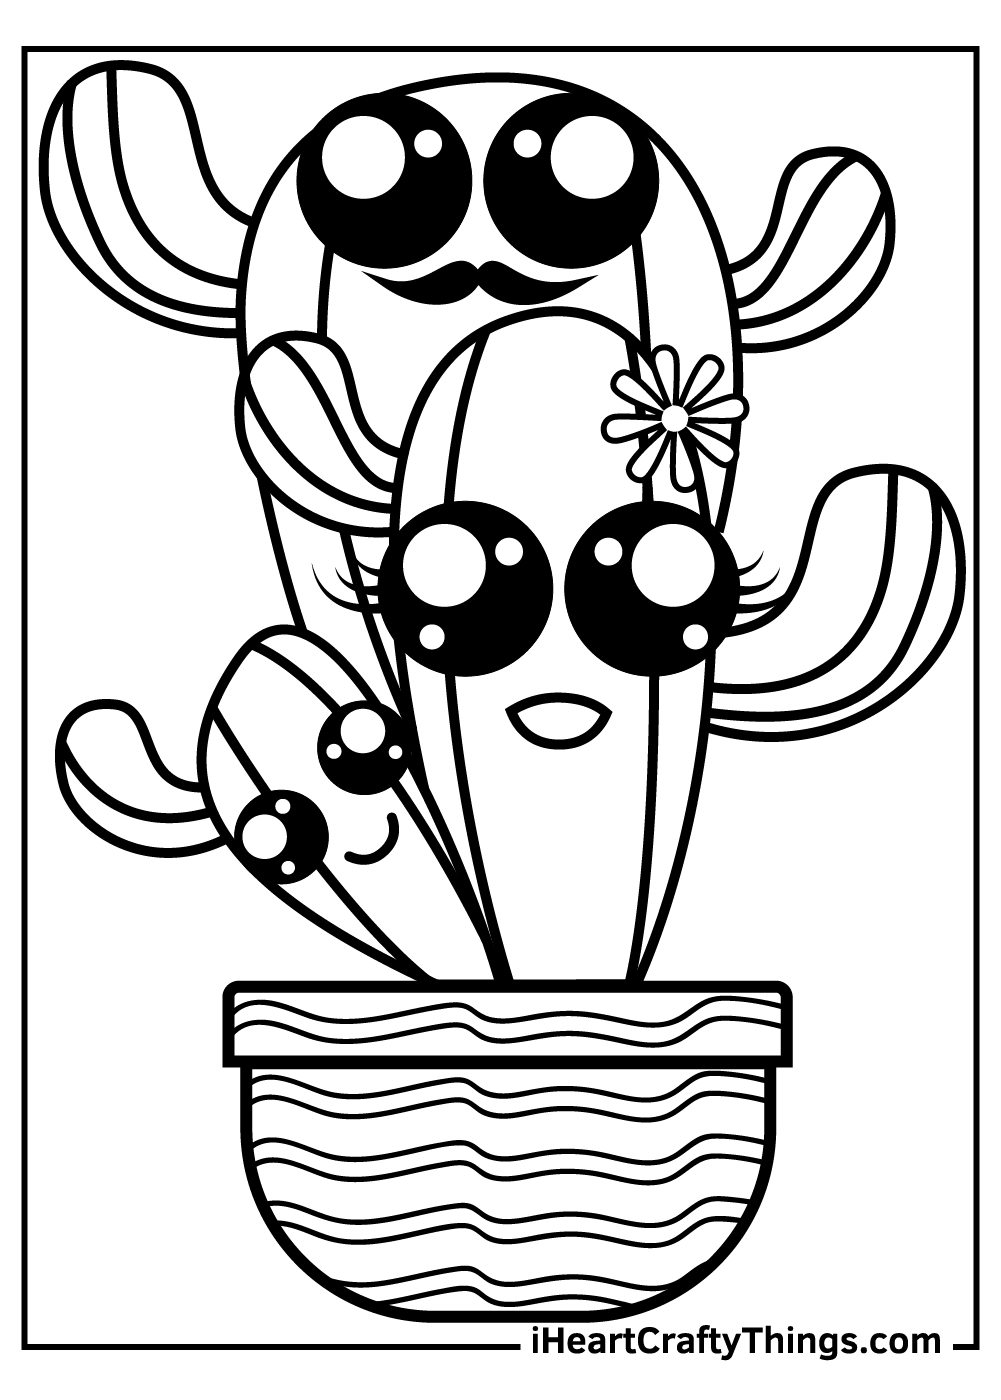 Cactus coloring pages updated